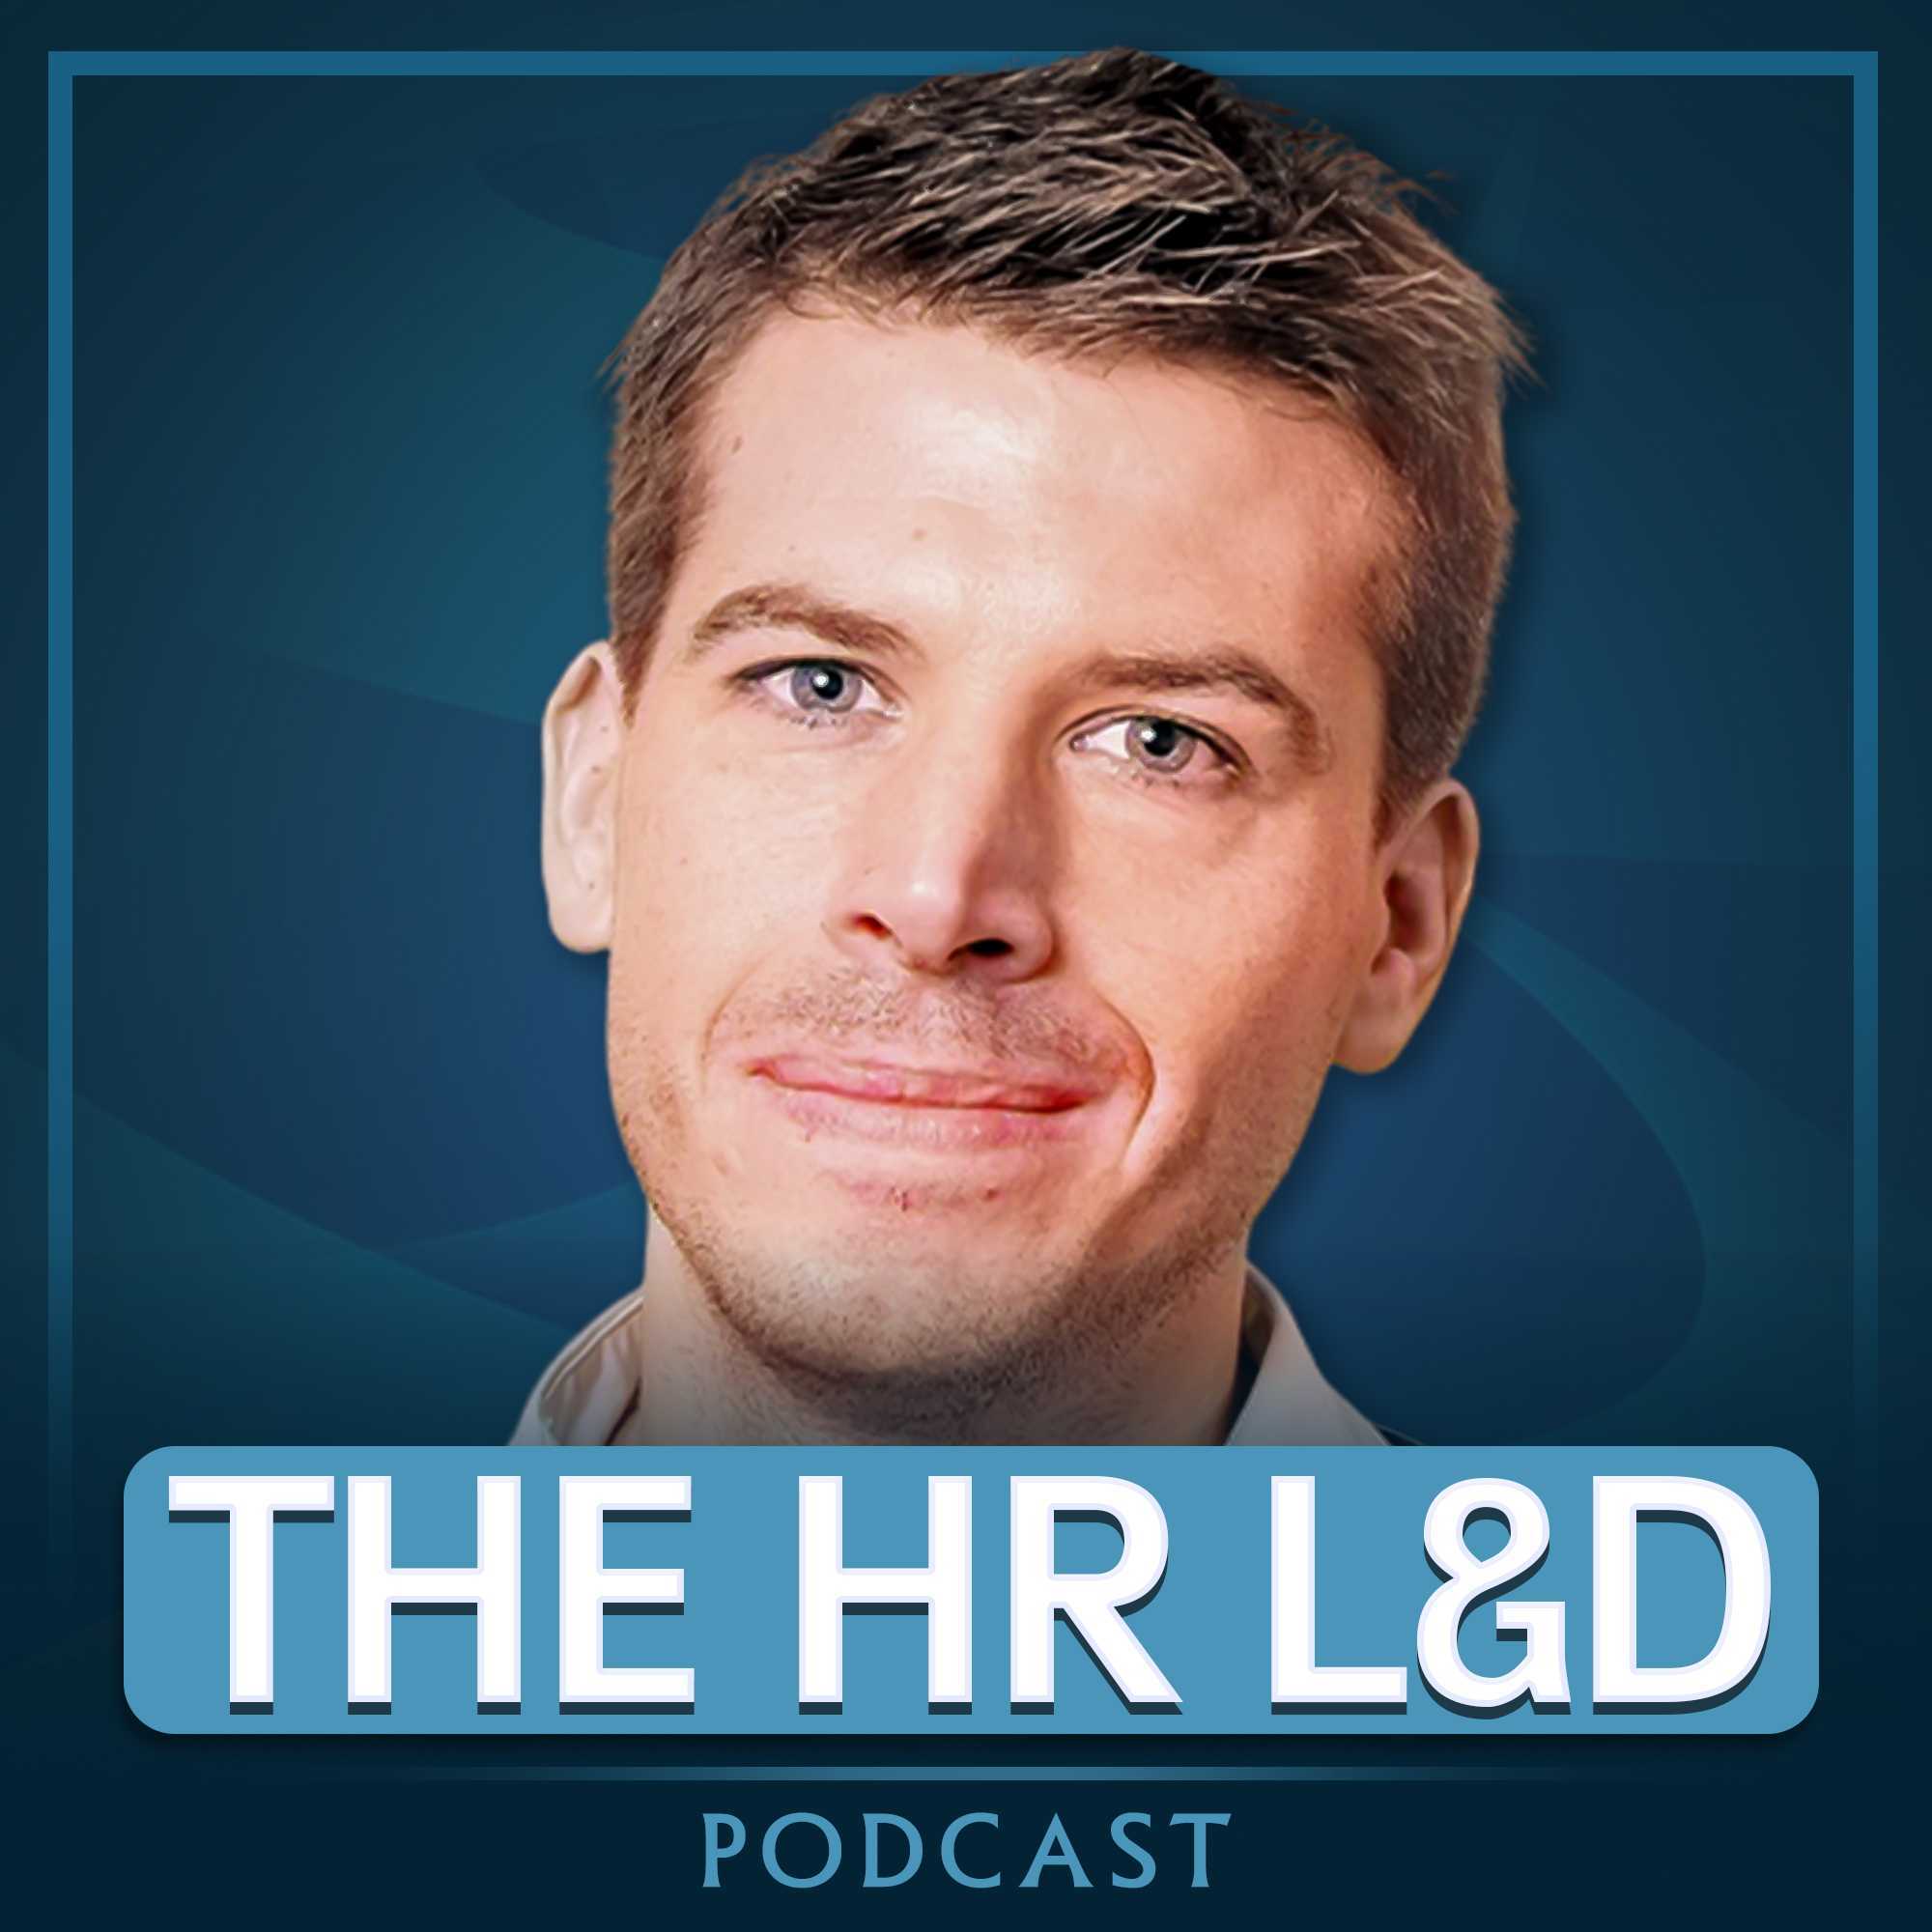 The Ultimate Guide for HR Process Optimisation with Andrew Swiler